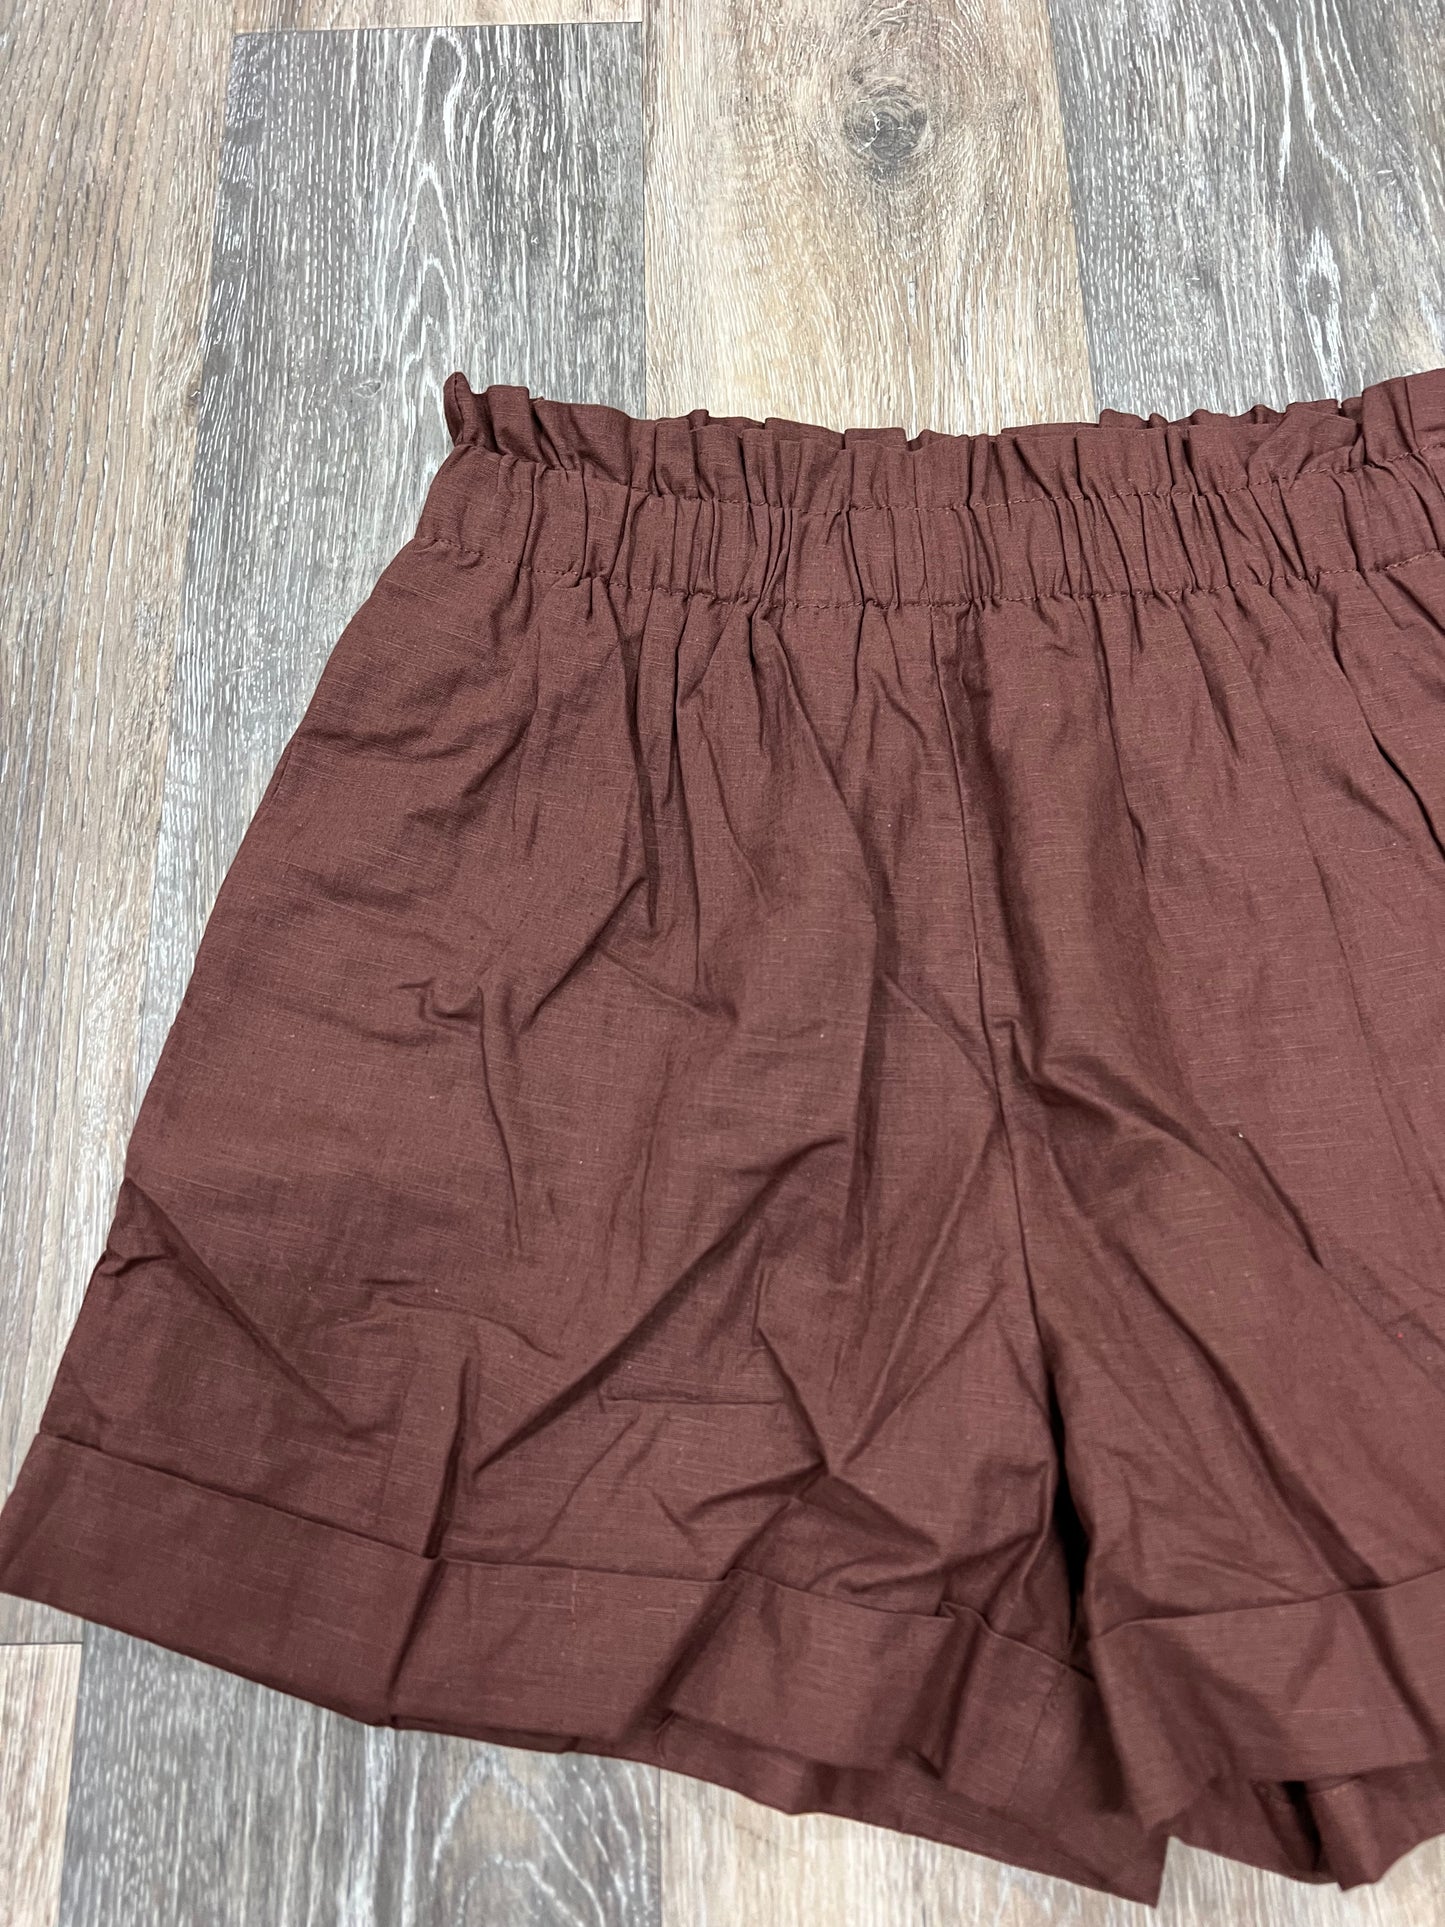 Shorts By Crescent  Size: M